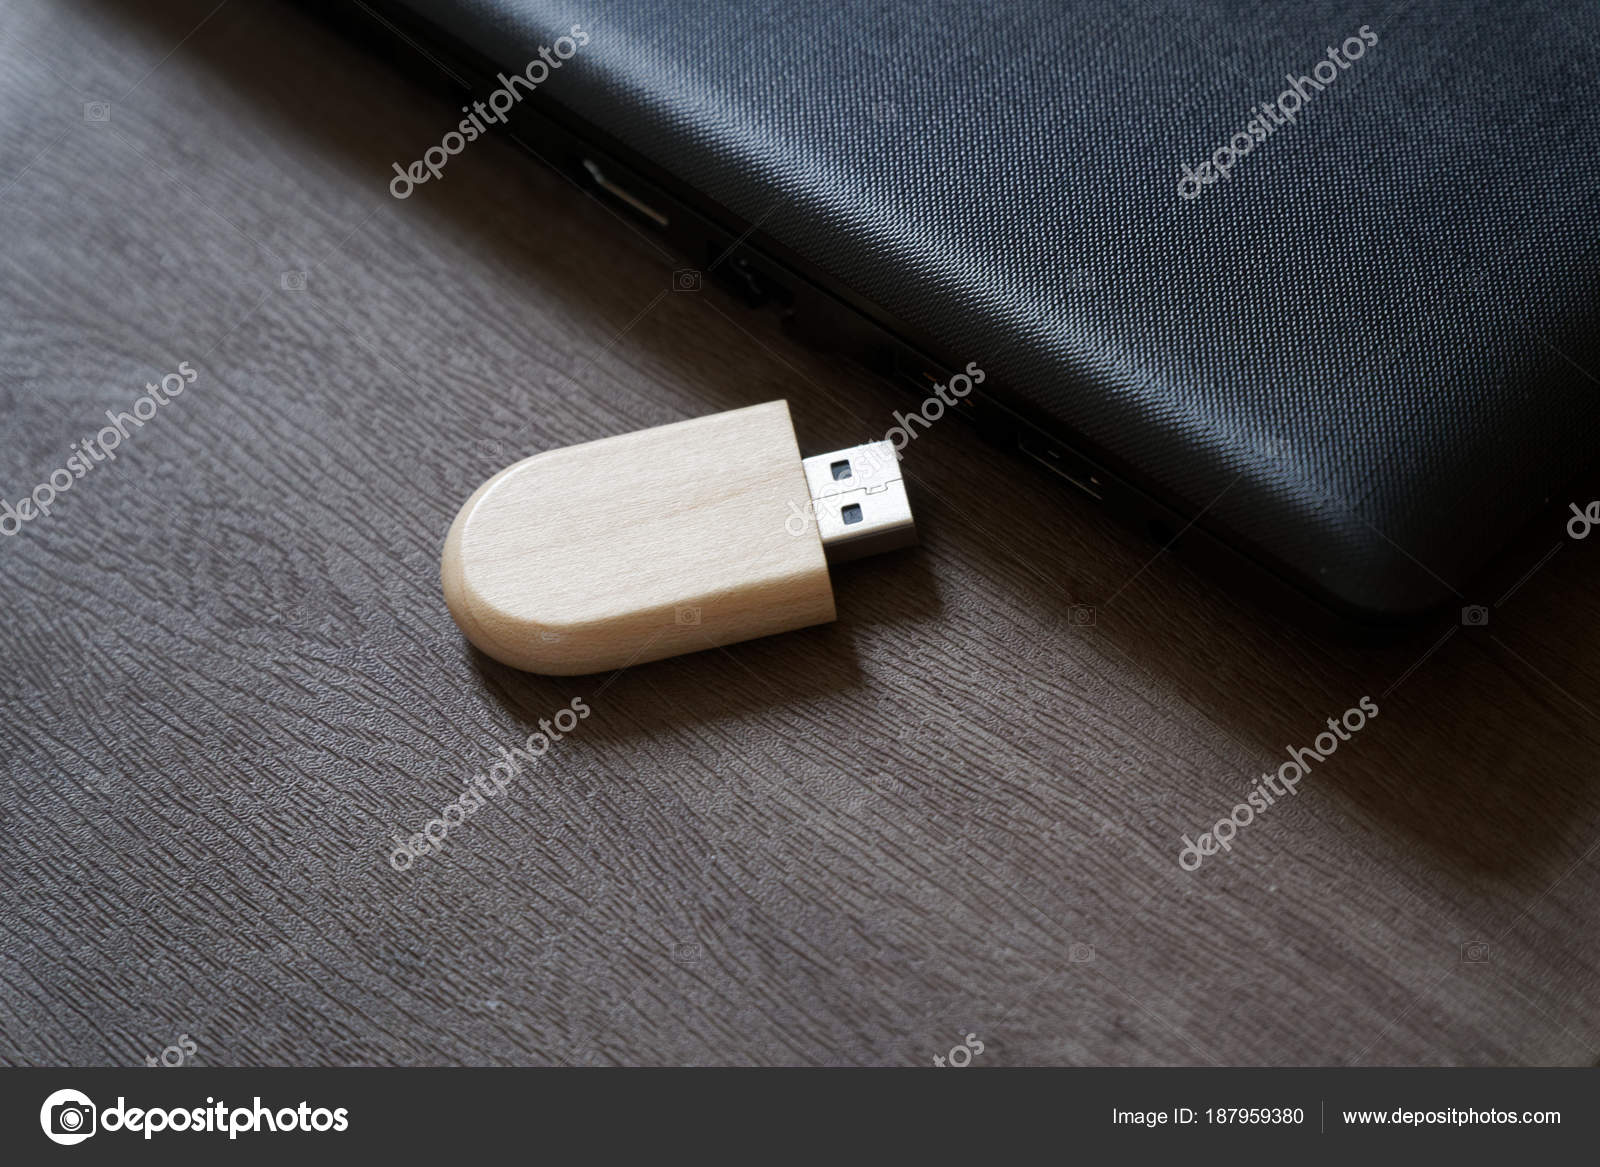 Usb Flash Drive With Wooden Surface On Desk For Usb Port Plug In